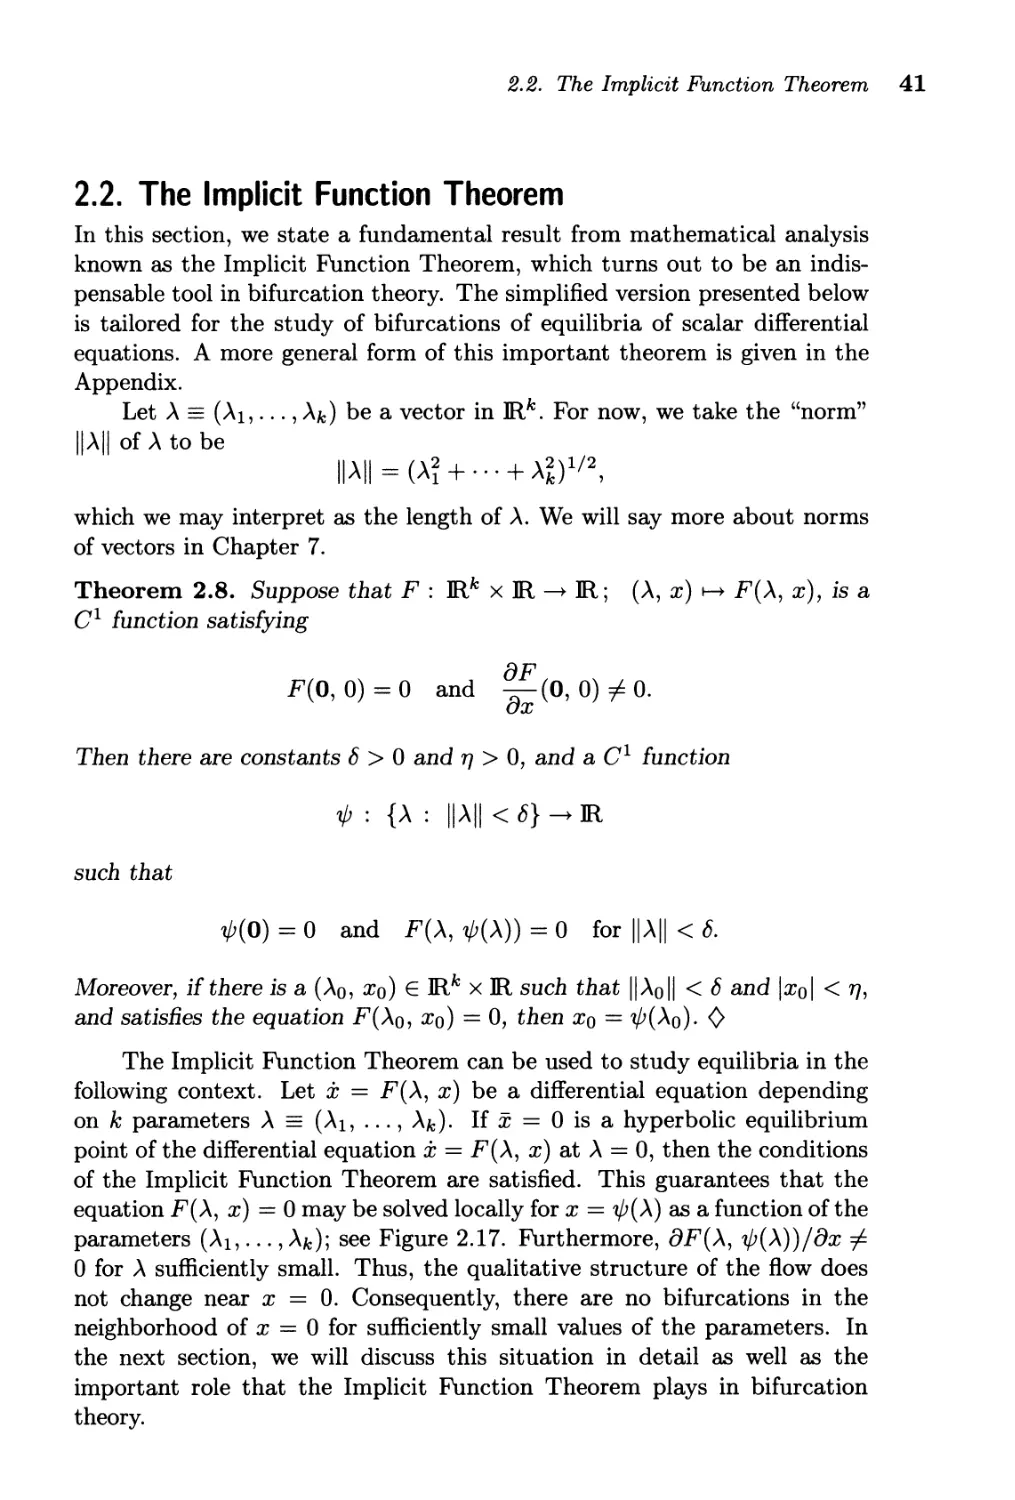 2.2. The Implicit Function Theorem